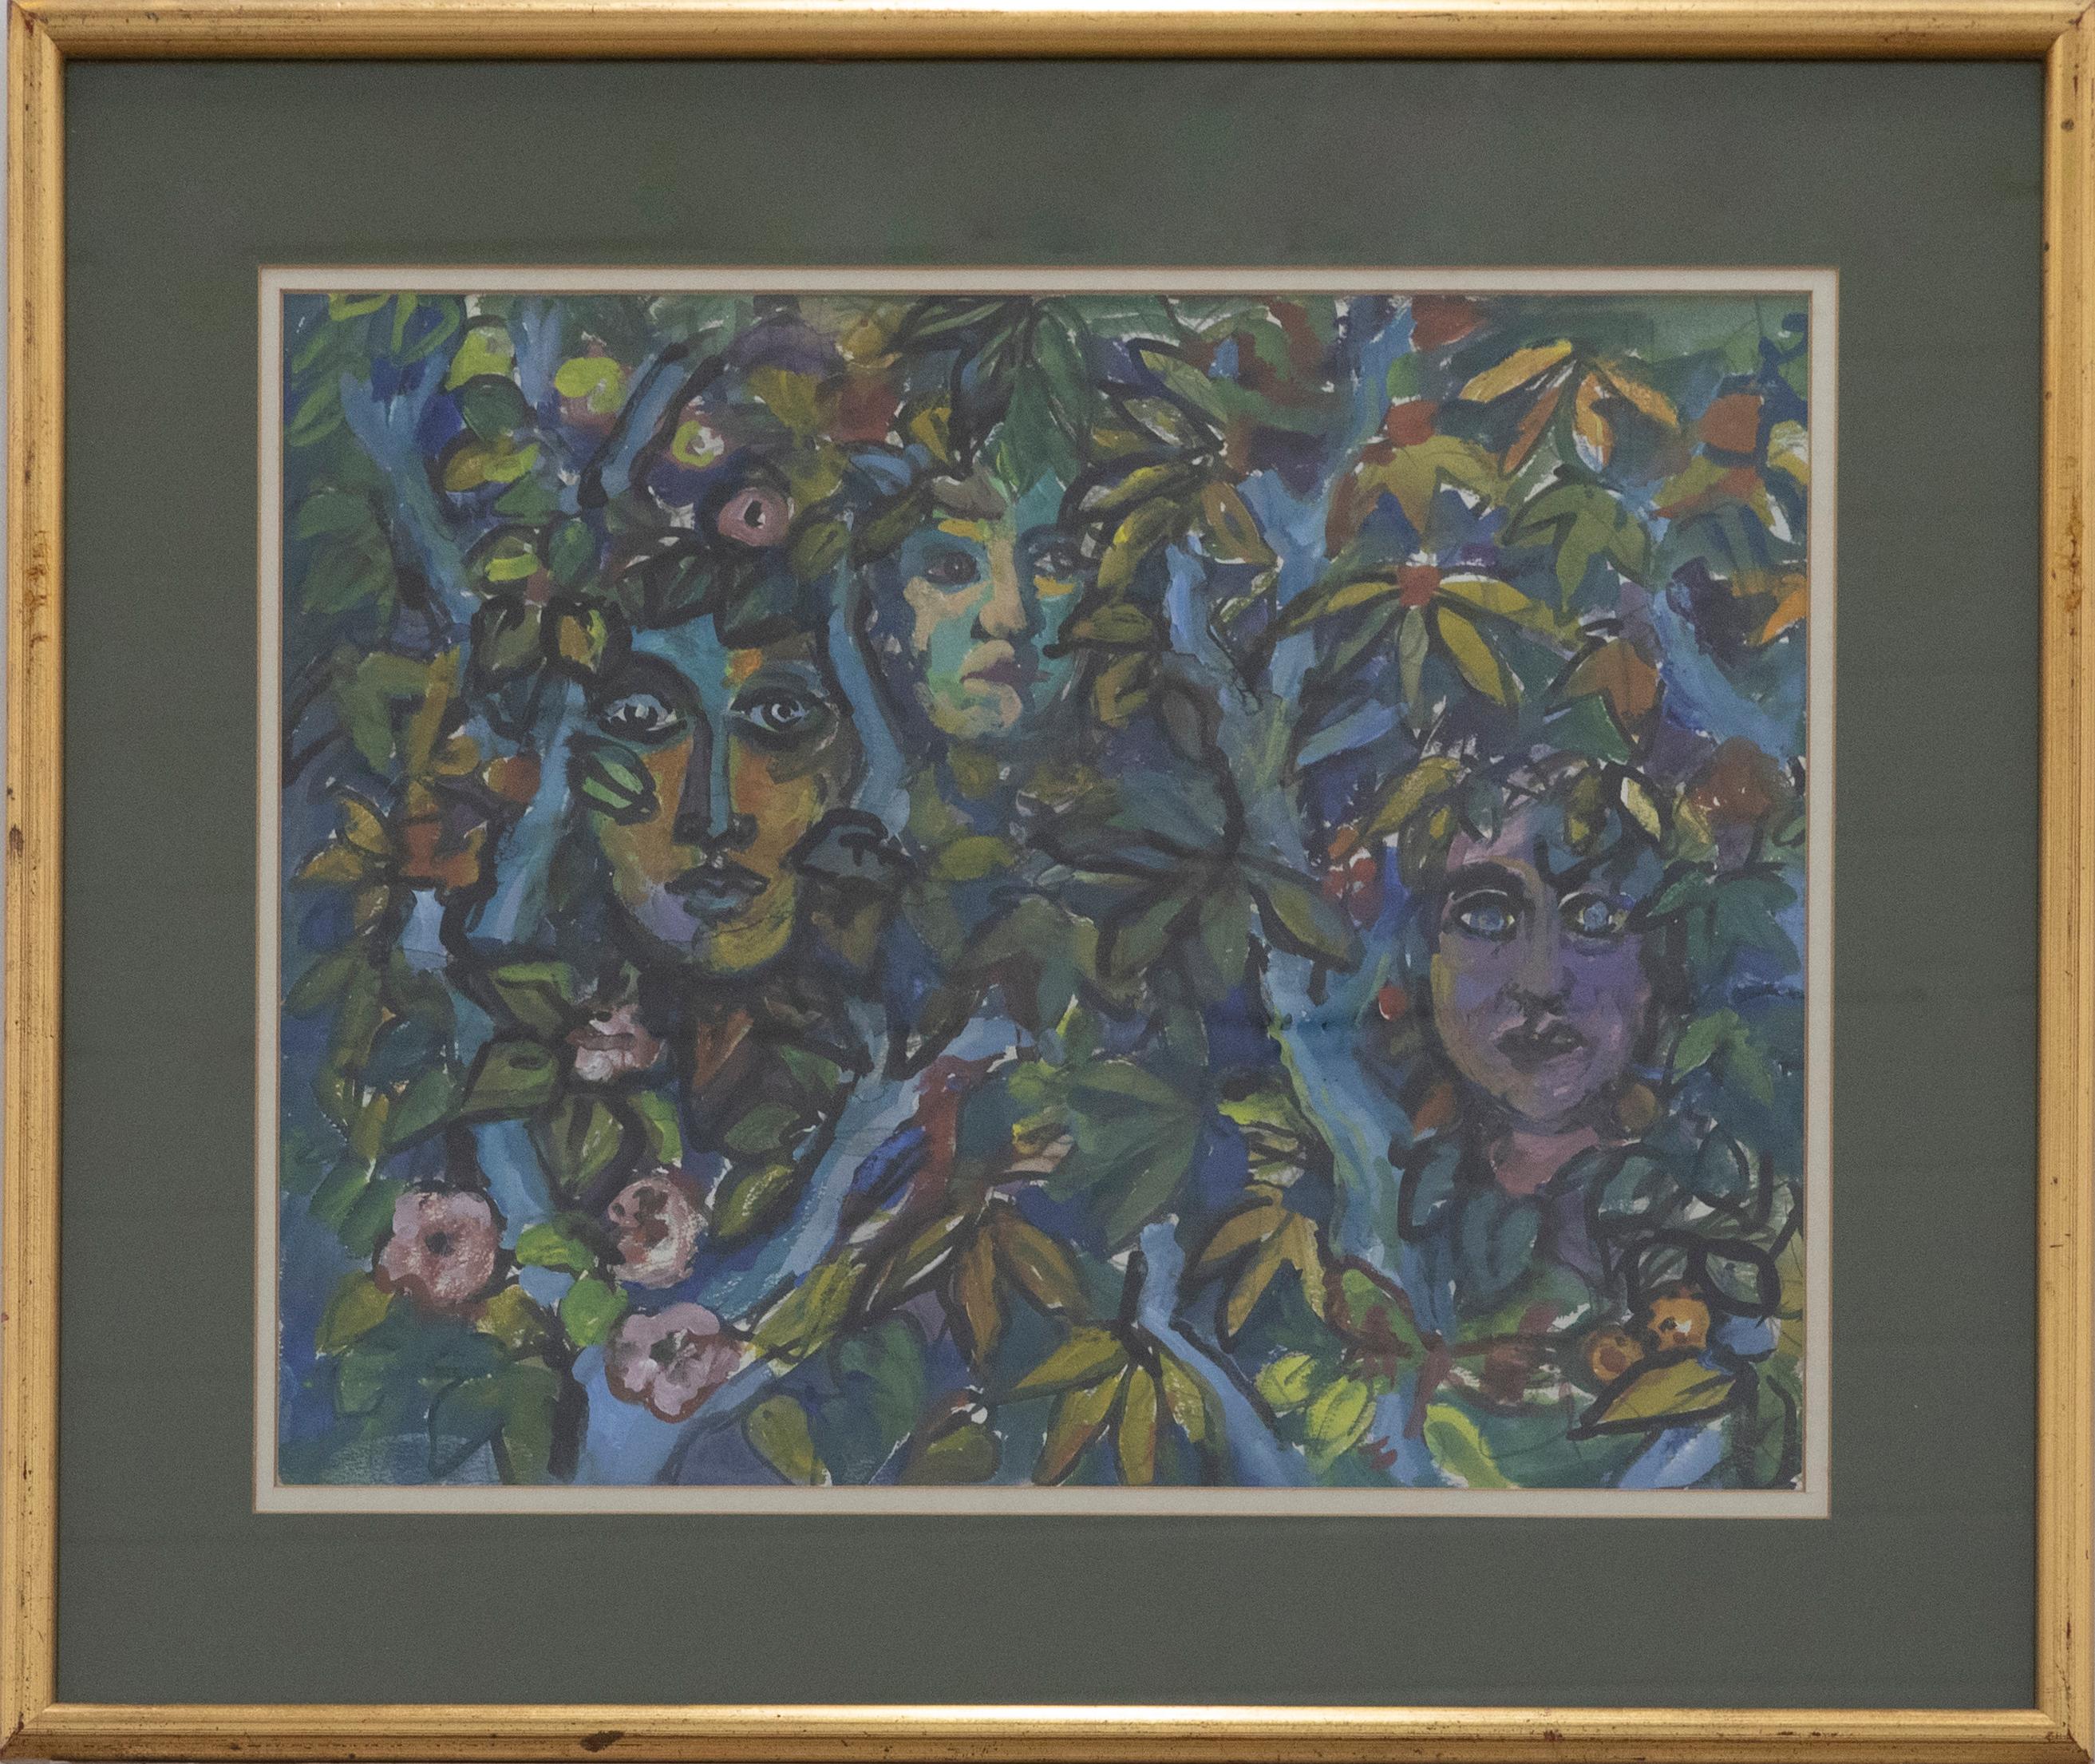 Unknown Figurative Art - Helen Steinthal (1911-1991) - 20th Century Watercolour, Faces in Foliage